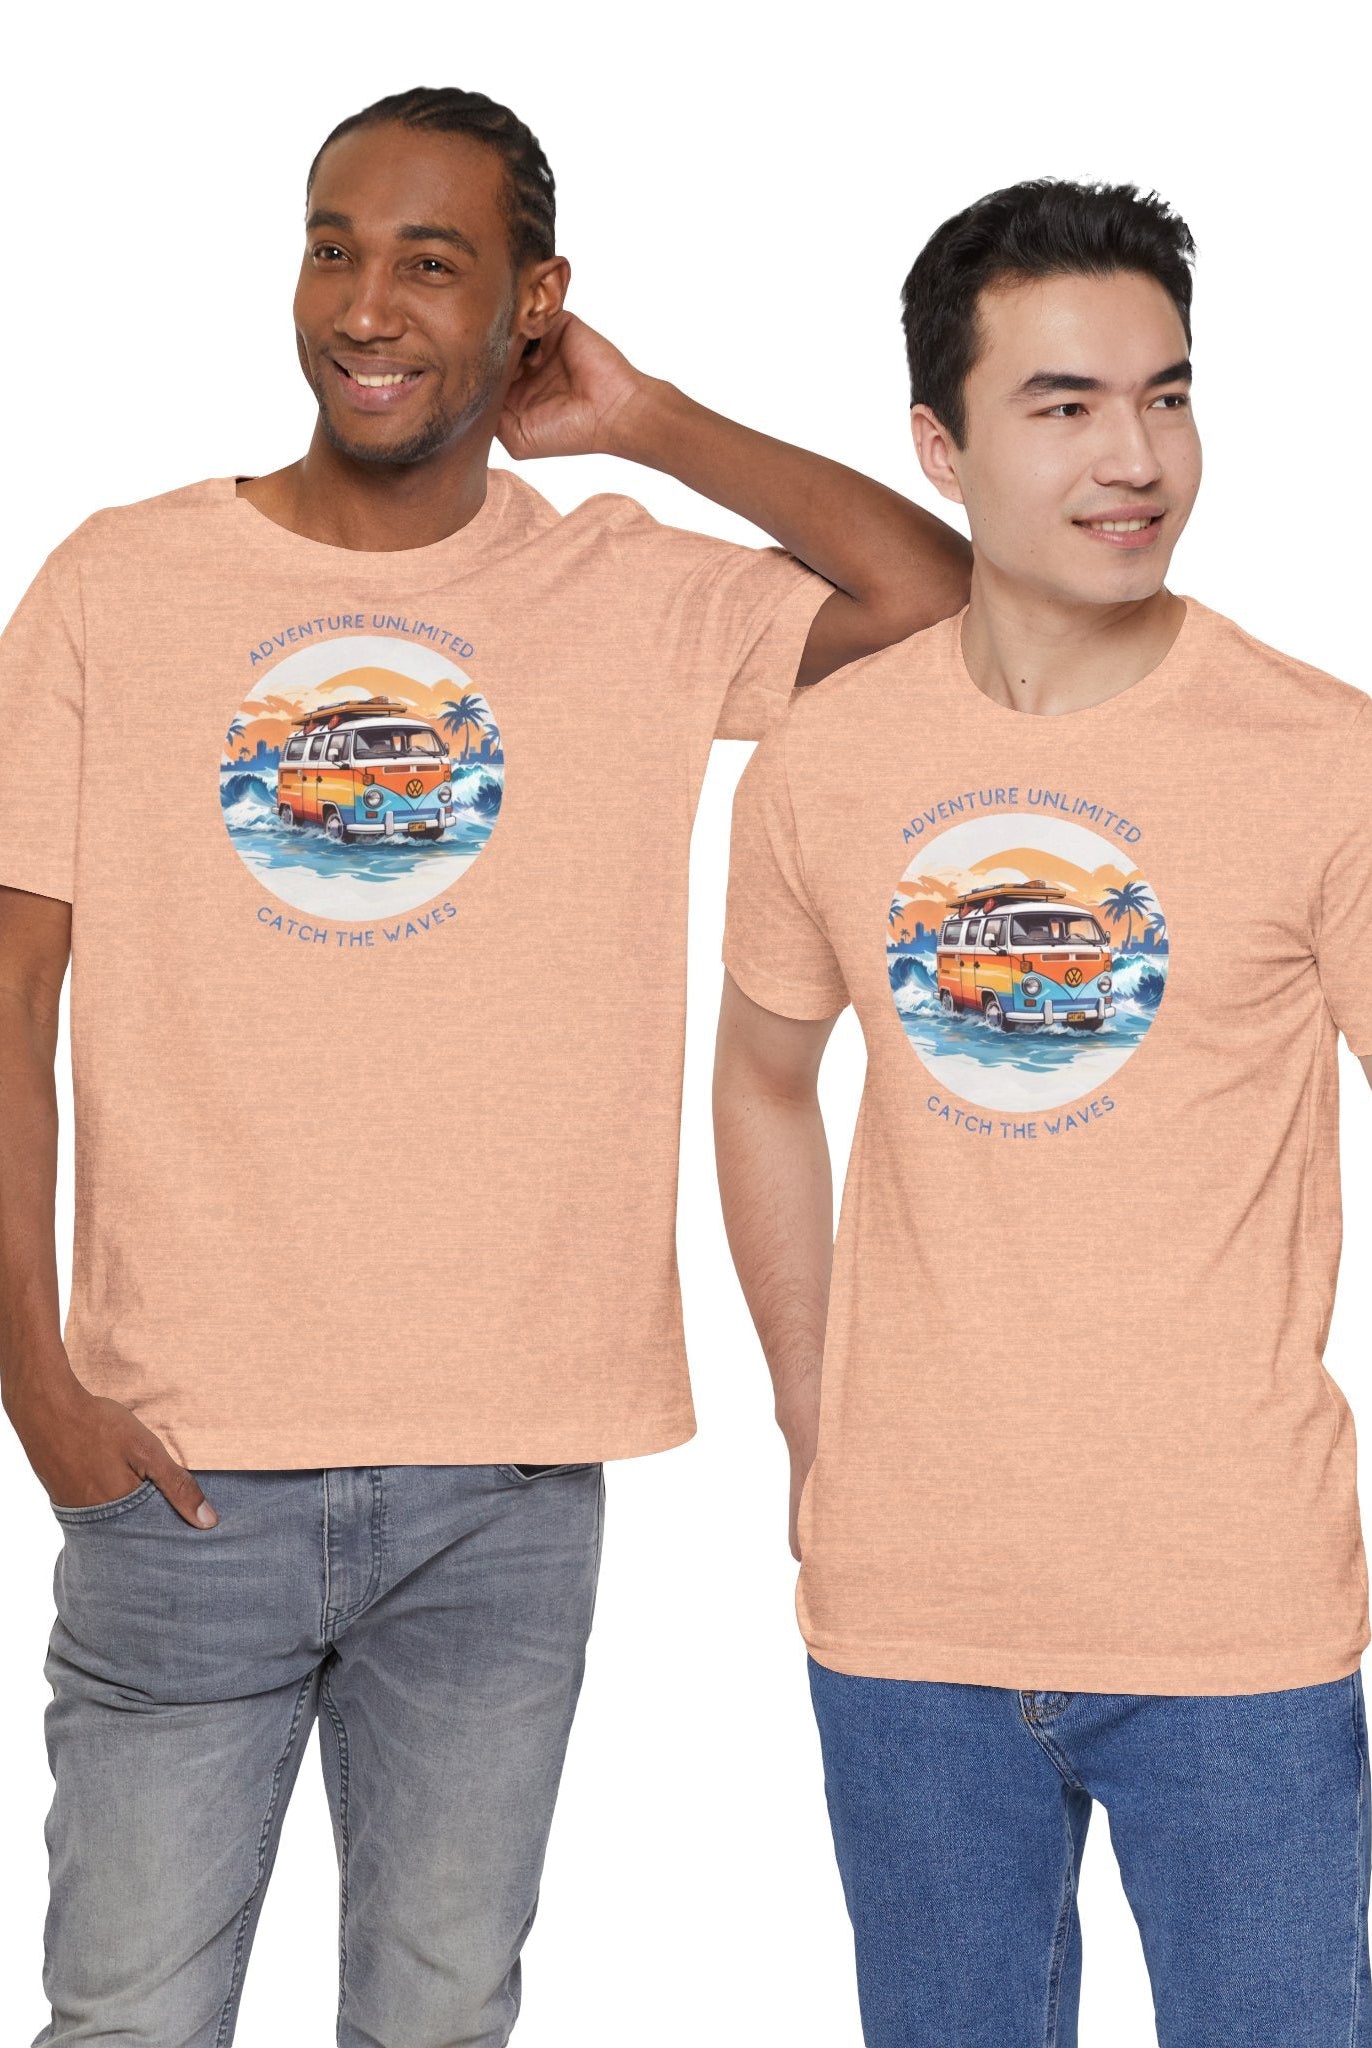 Two men wearing matching shirts - Adventure Unlimited Surfing T-Shirt printed on Bella & Canvas EU direct-to-garment item